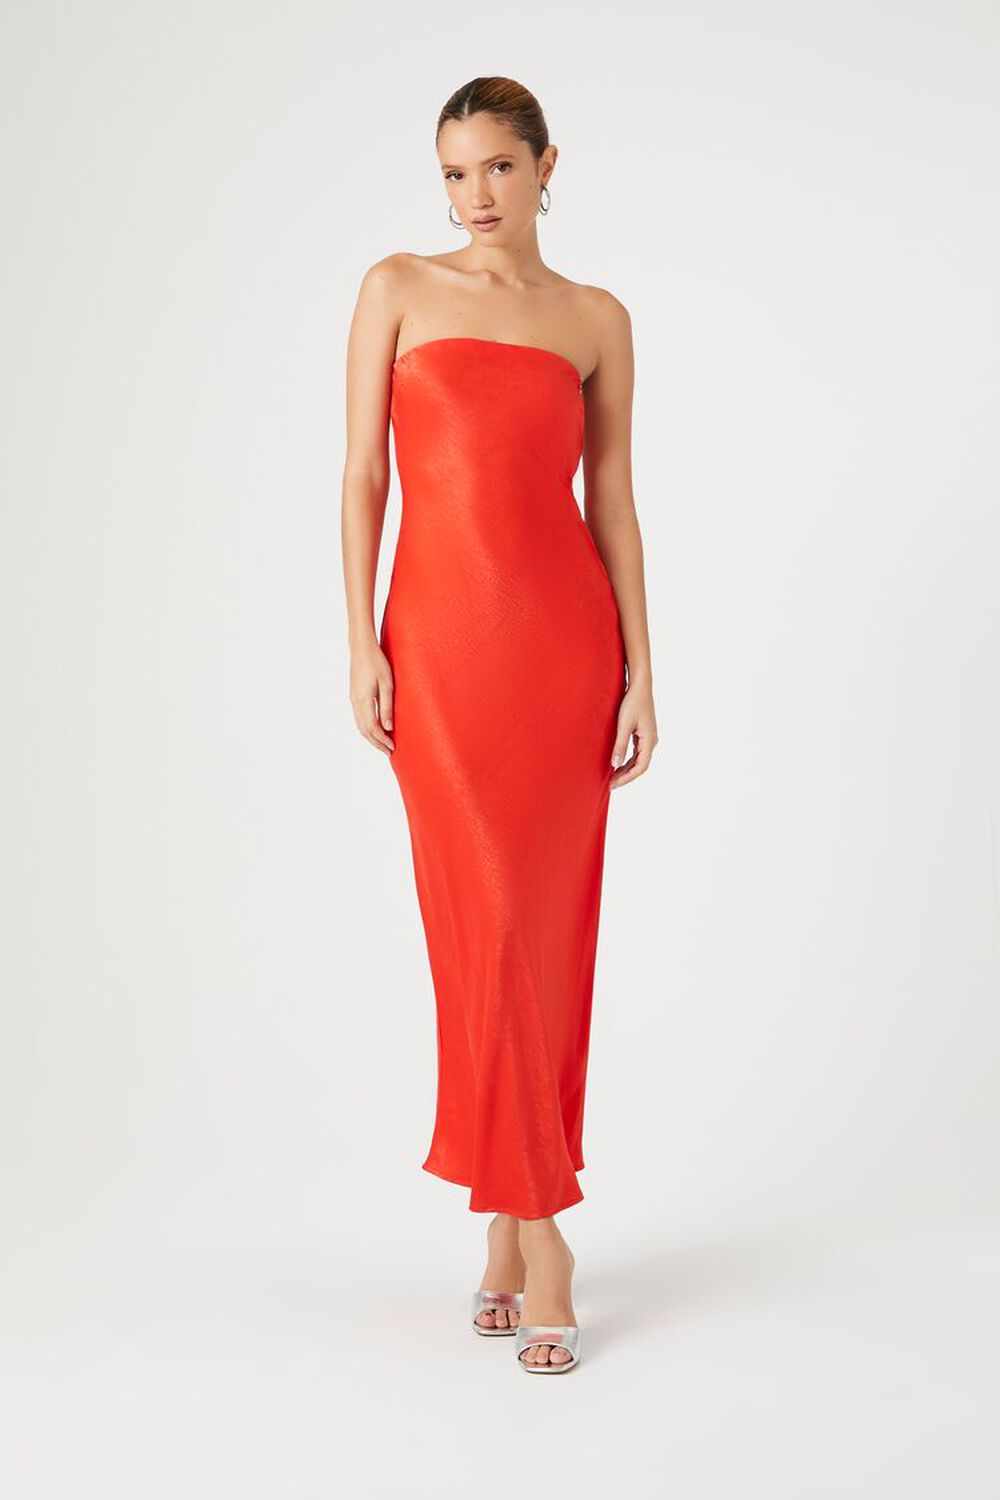 FIERY RED Satin Strapless Maxi Dress, image 1